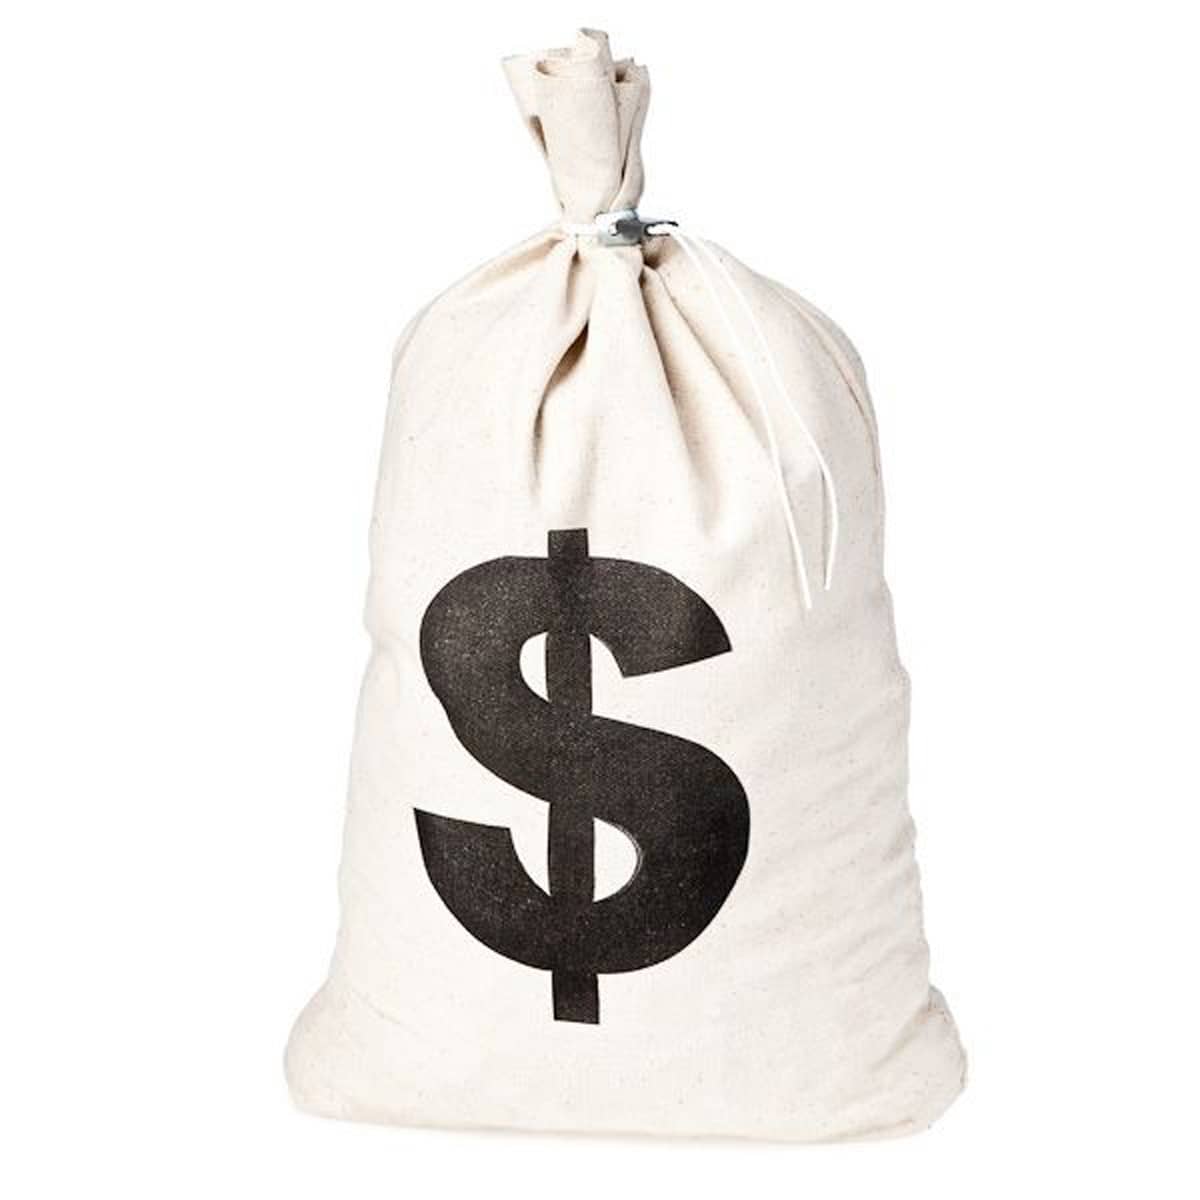 Large Canvas Money Bag Pouch With Drawstring Closure And Dollar Sign